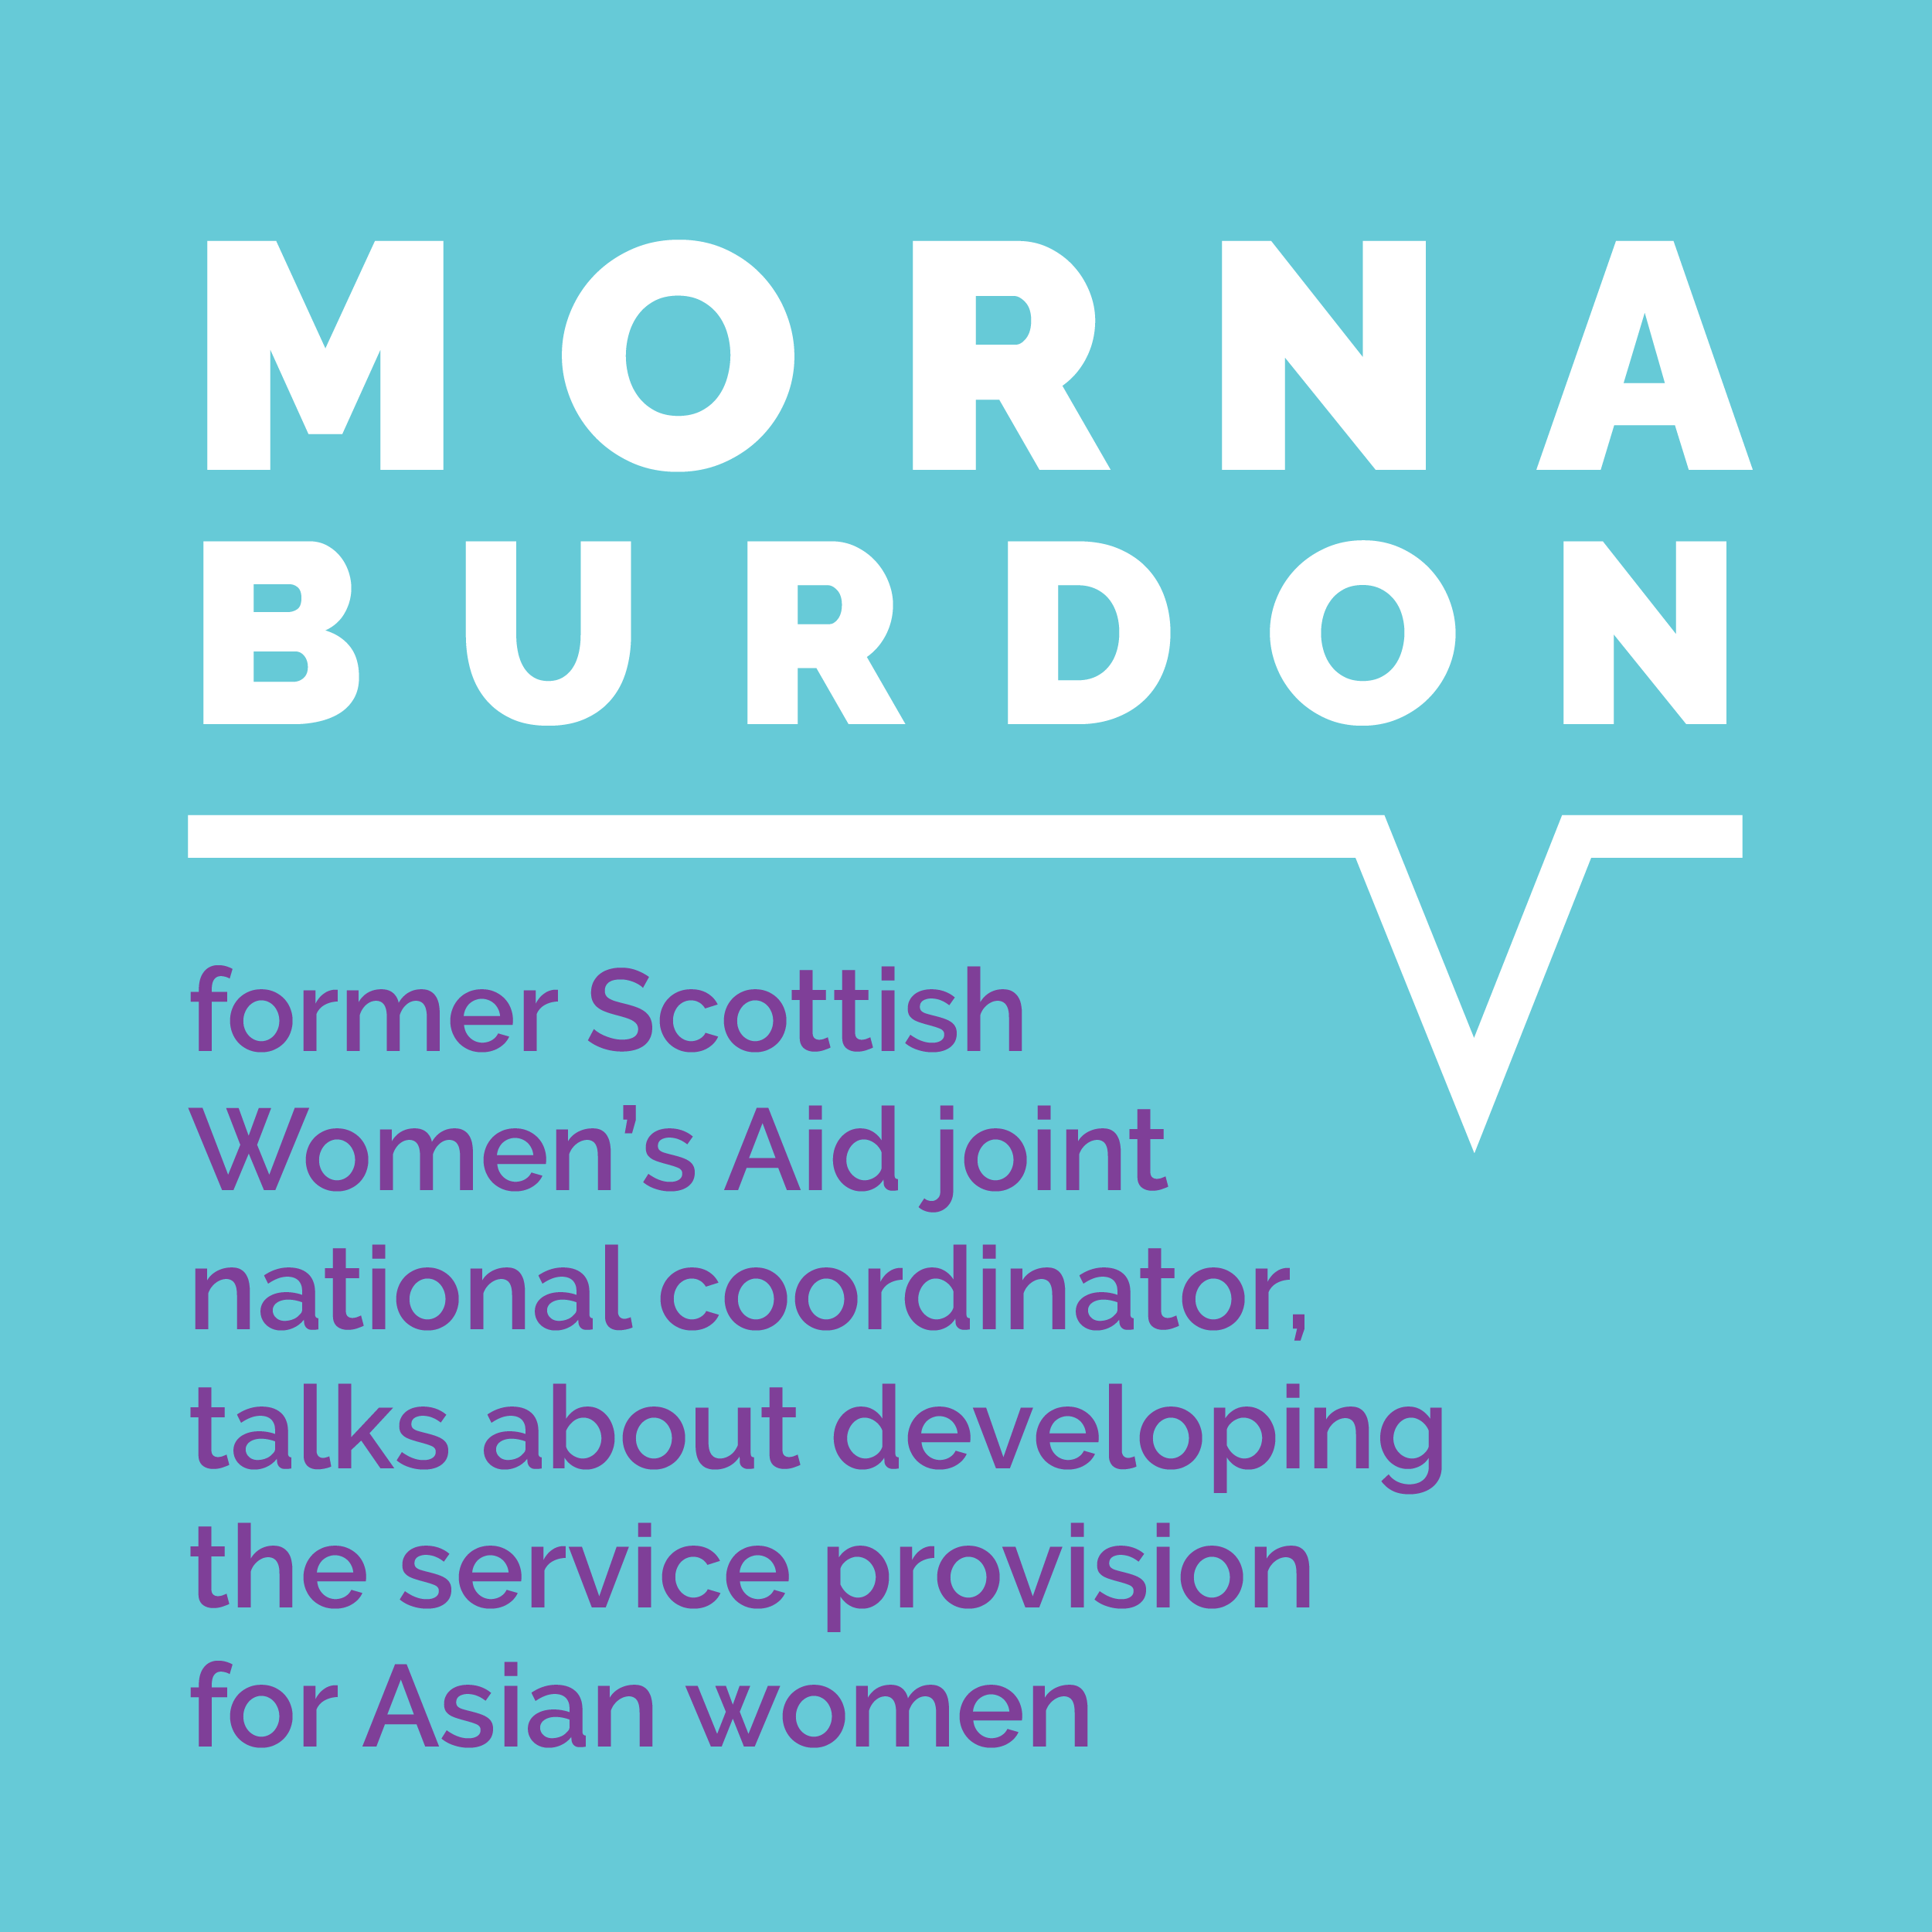 Morna Burdon, former Scottish Women's Aid joint national coordinator, talks about developing the service provision for Asian women